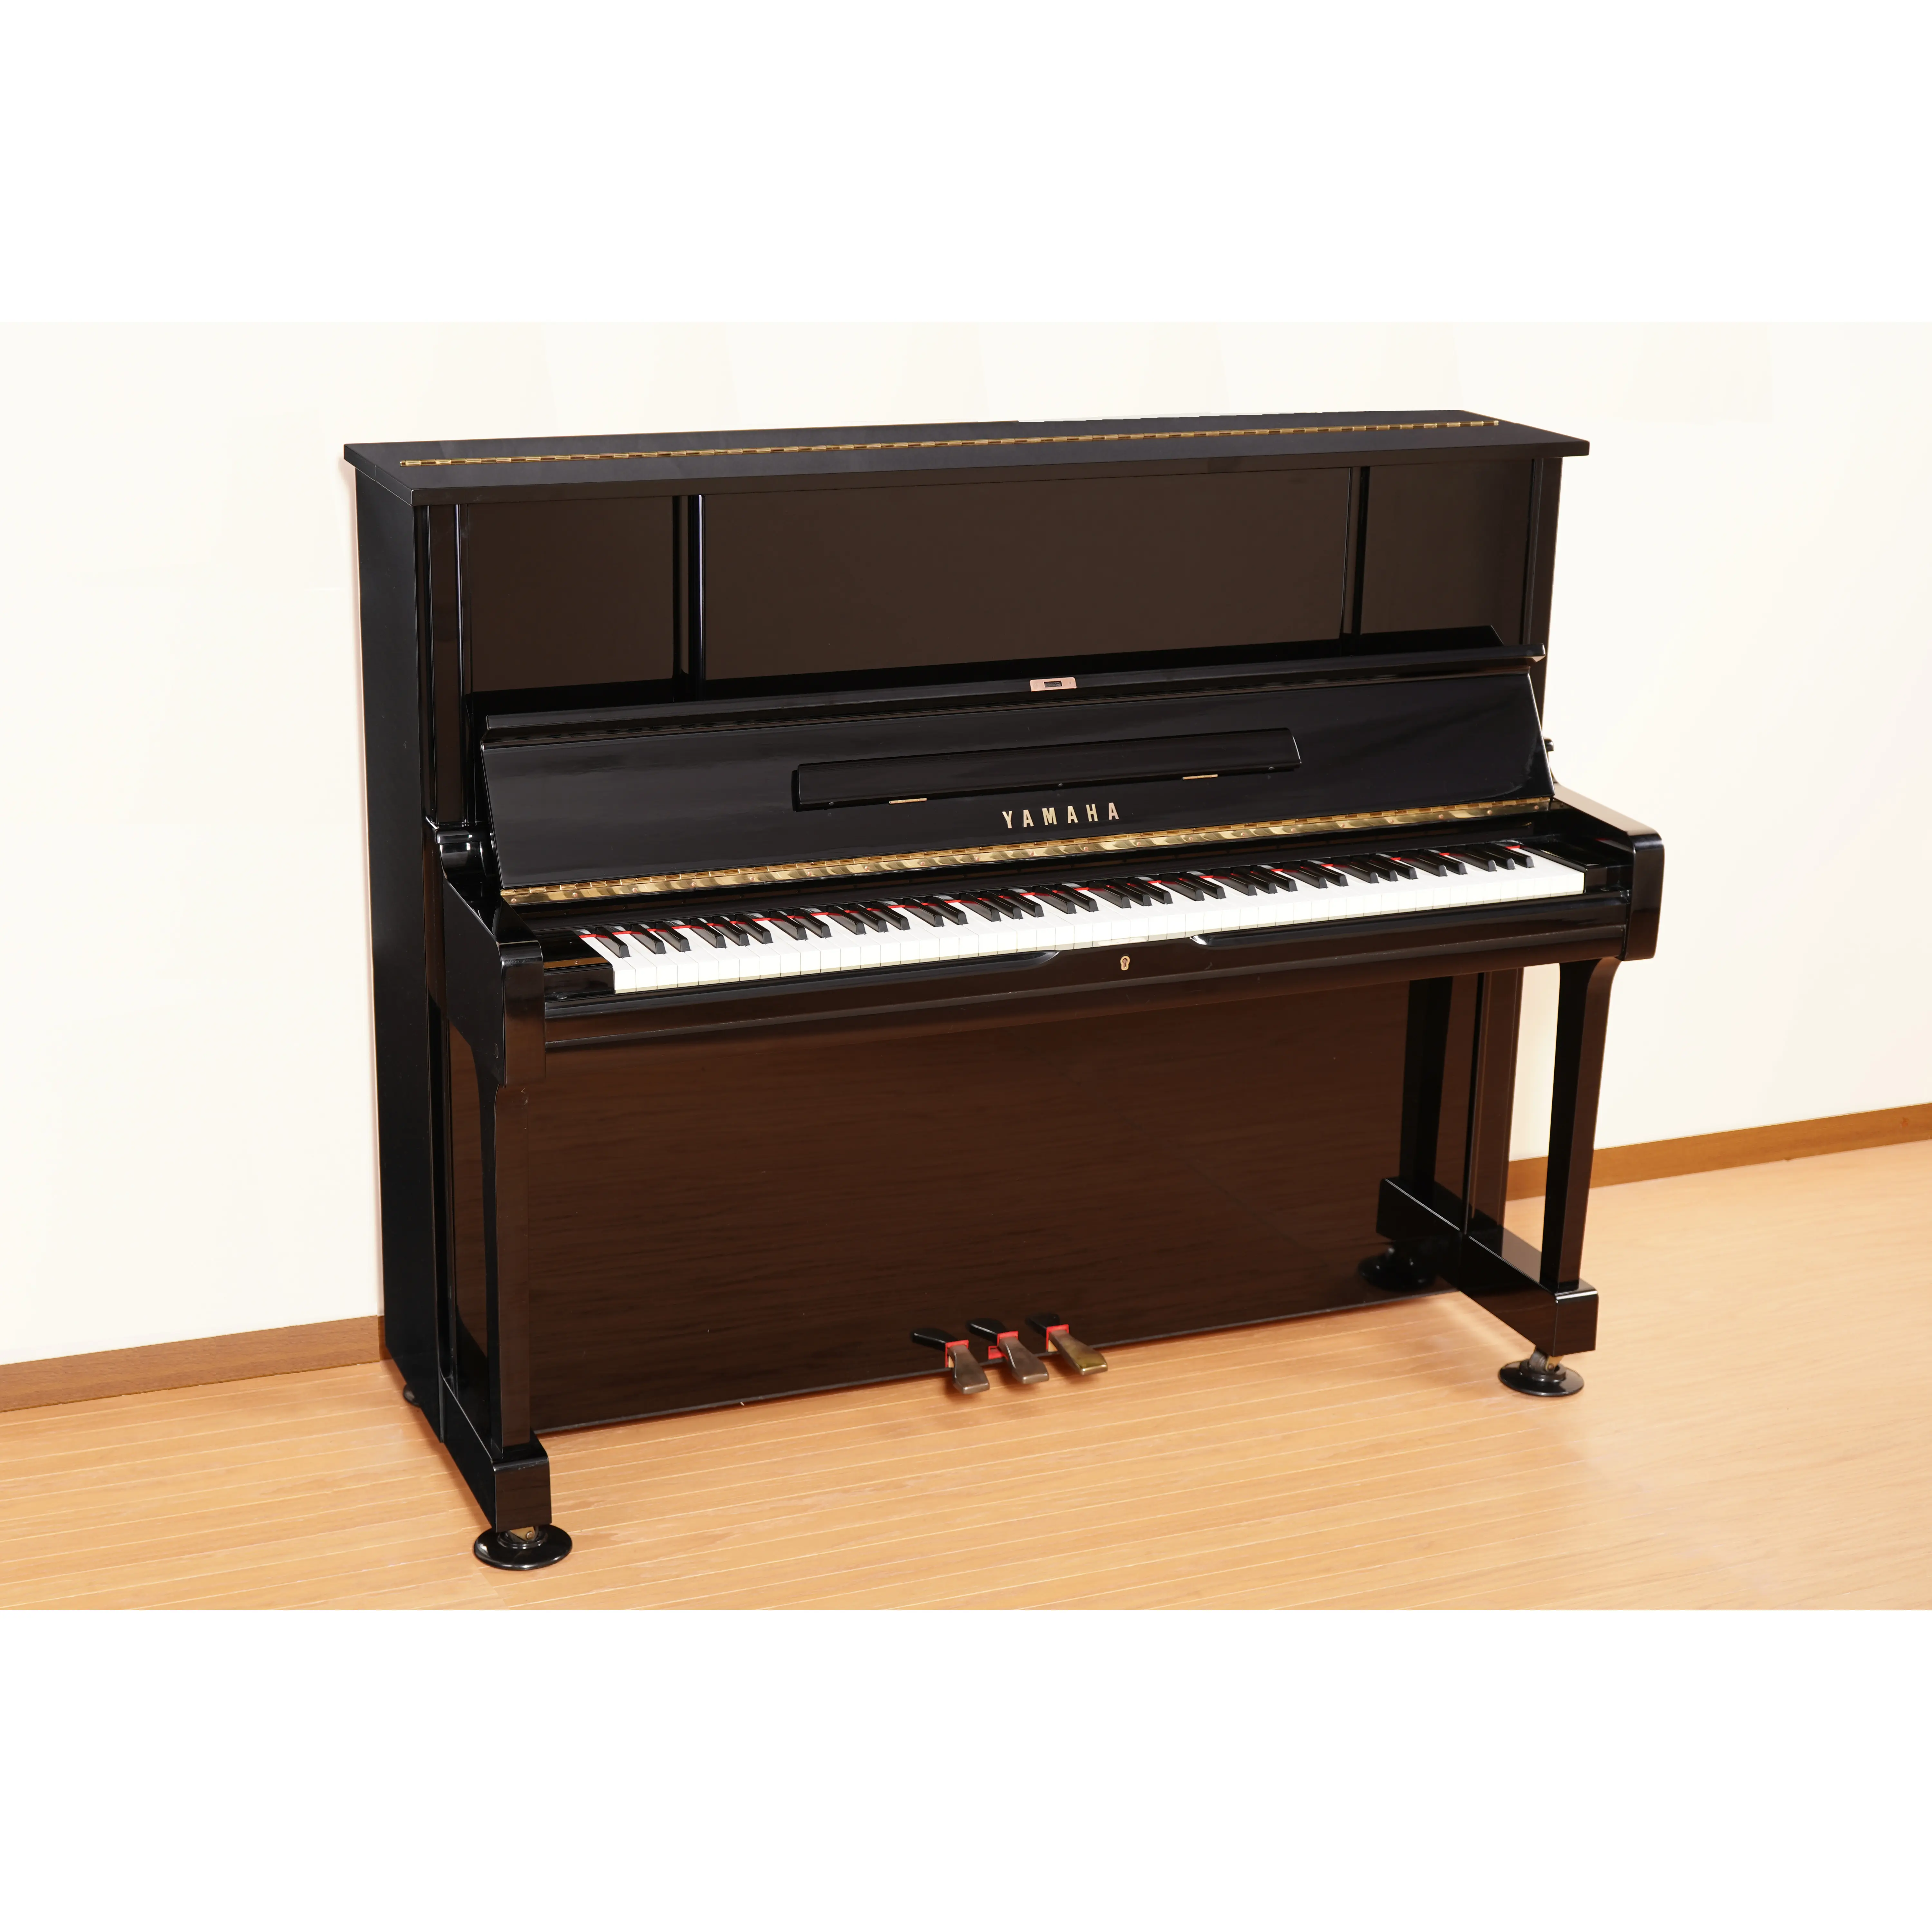 Manufactured by YAMAHA acoustic upright piano prices for sale